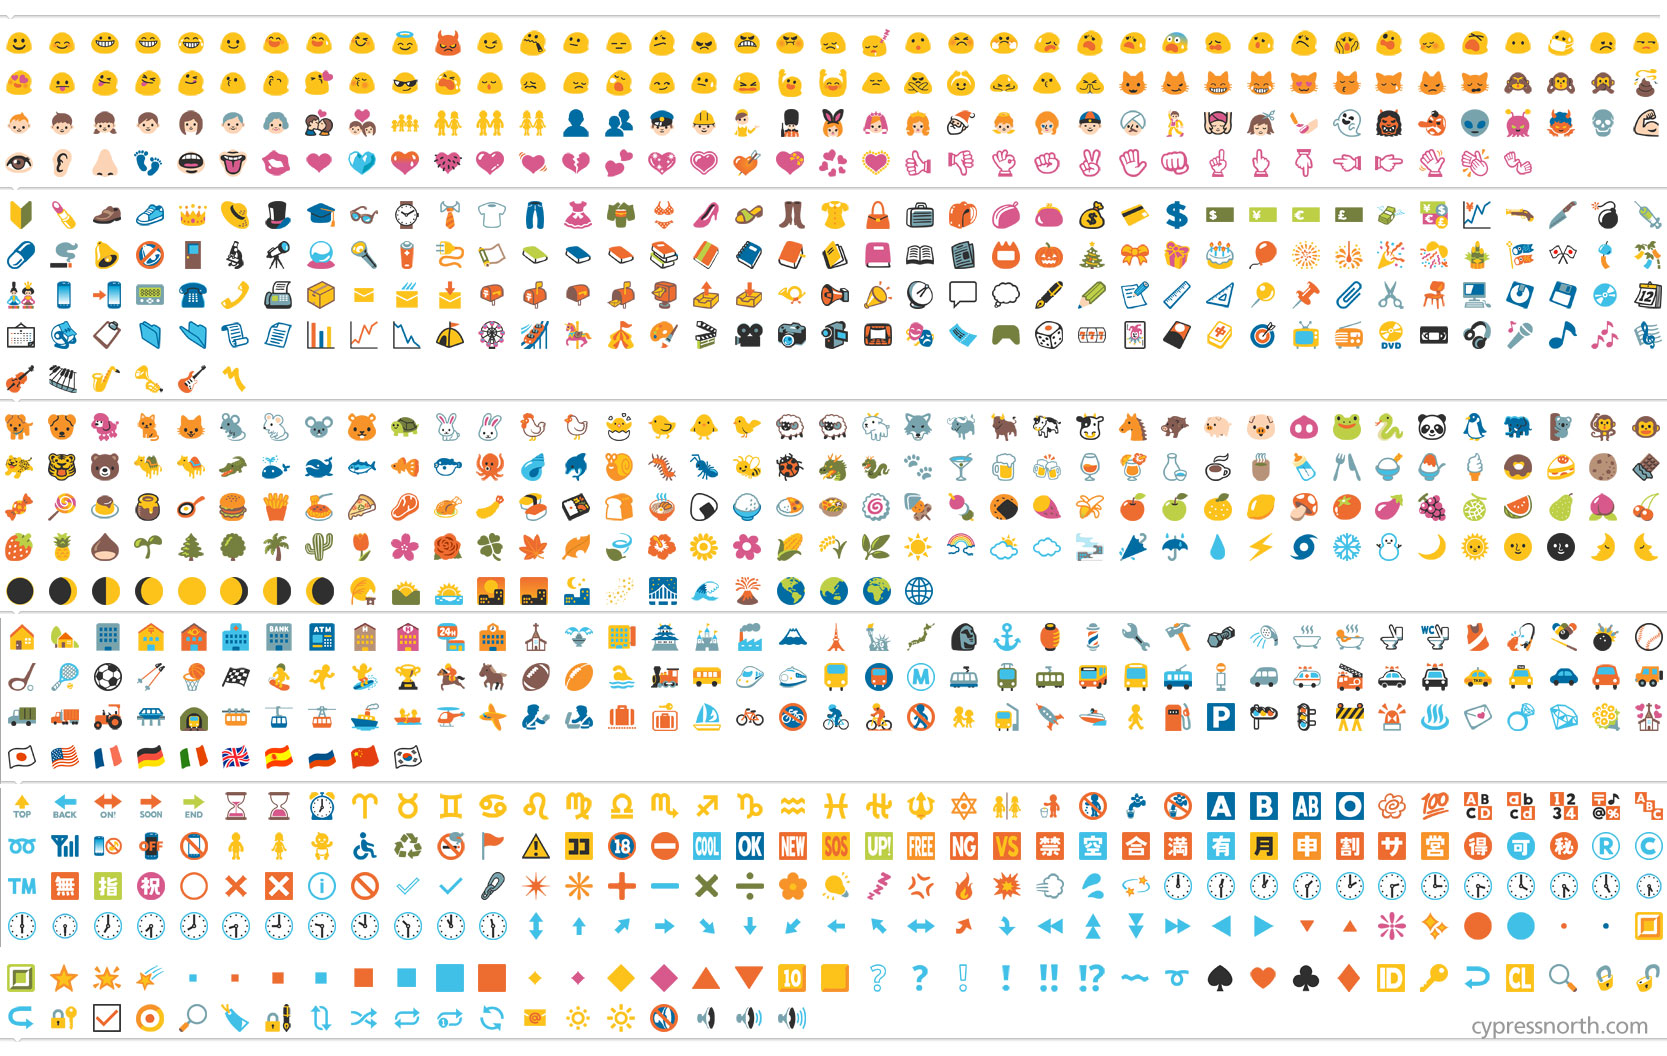 20 Photos of Emoji Icons For Computer